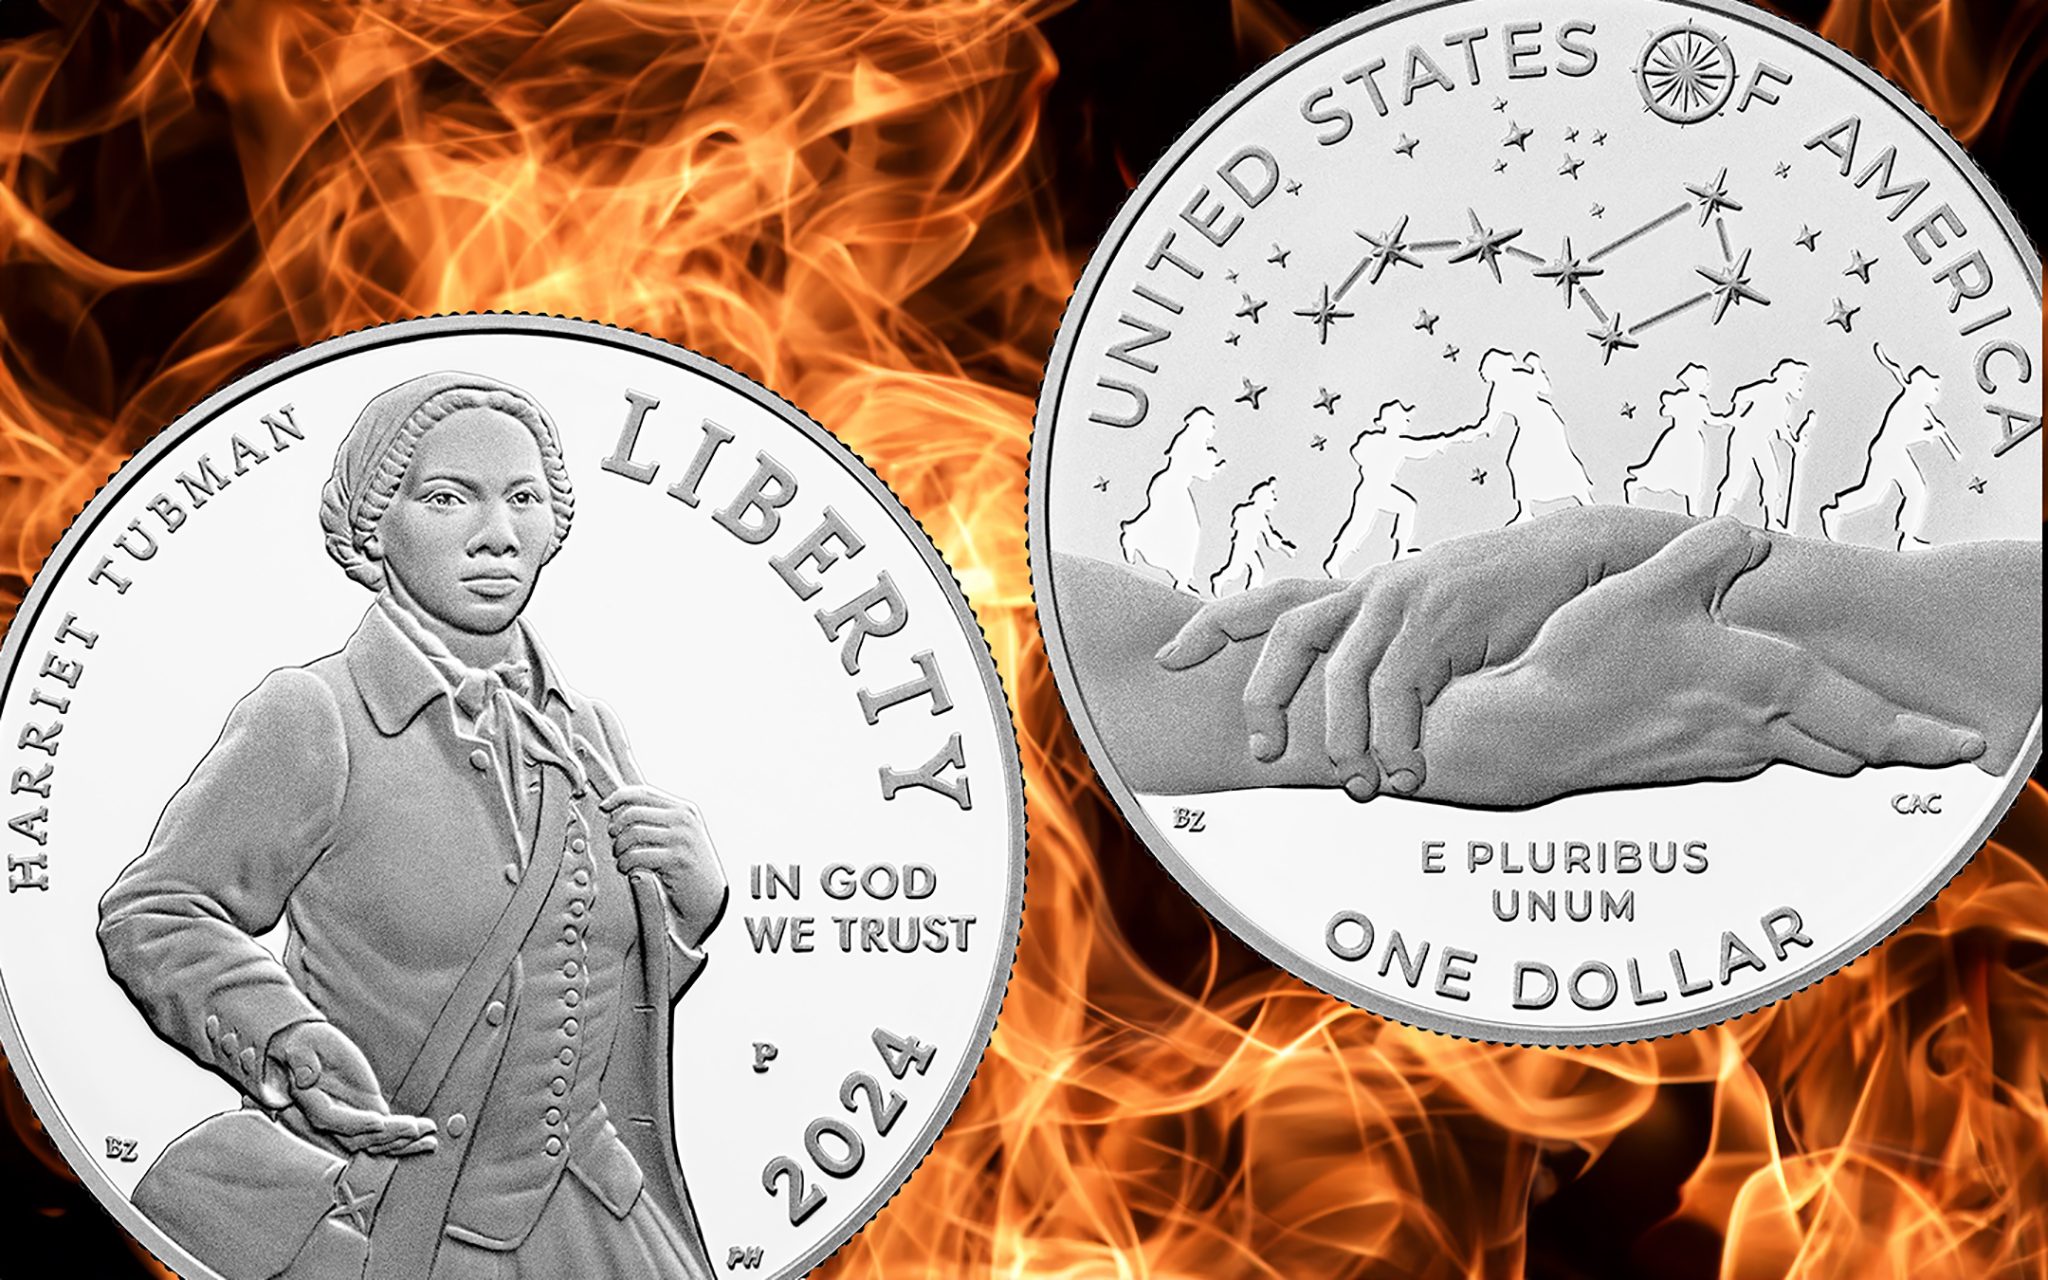 Harriet Tubman Honored on Commemorative Coins